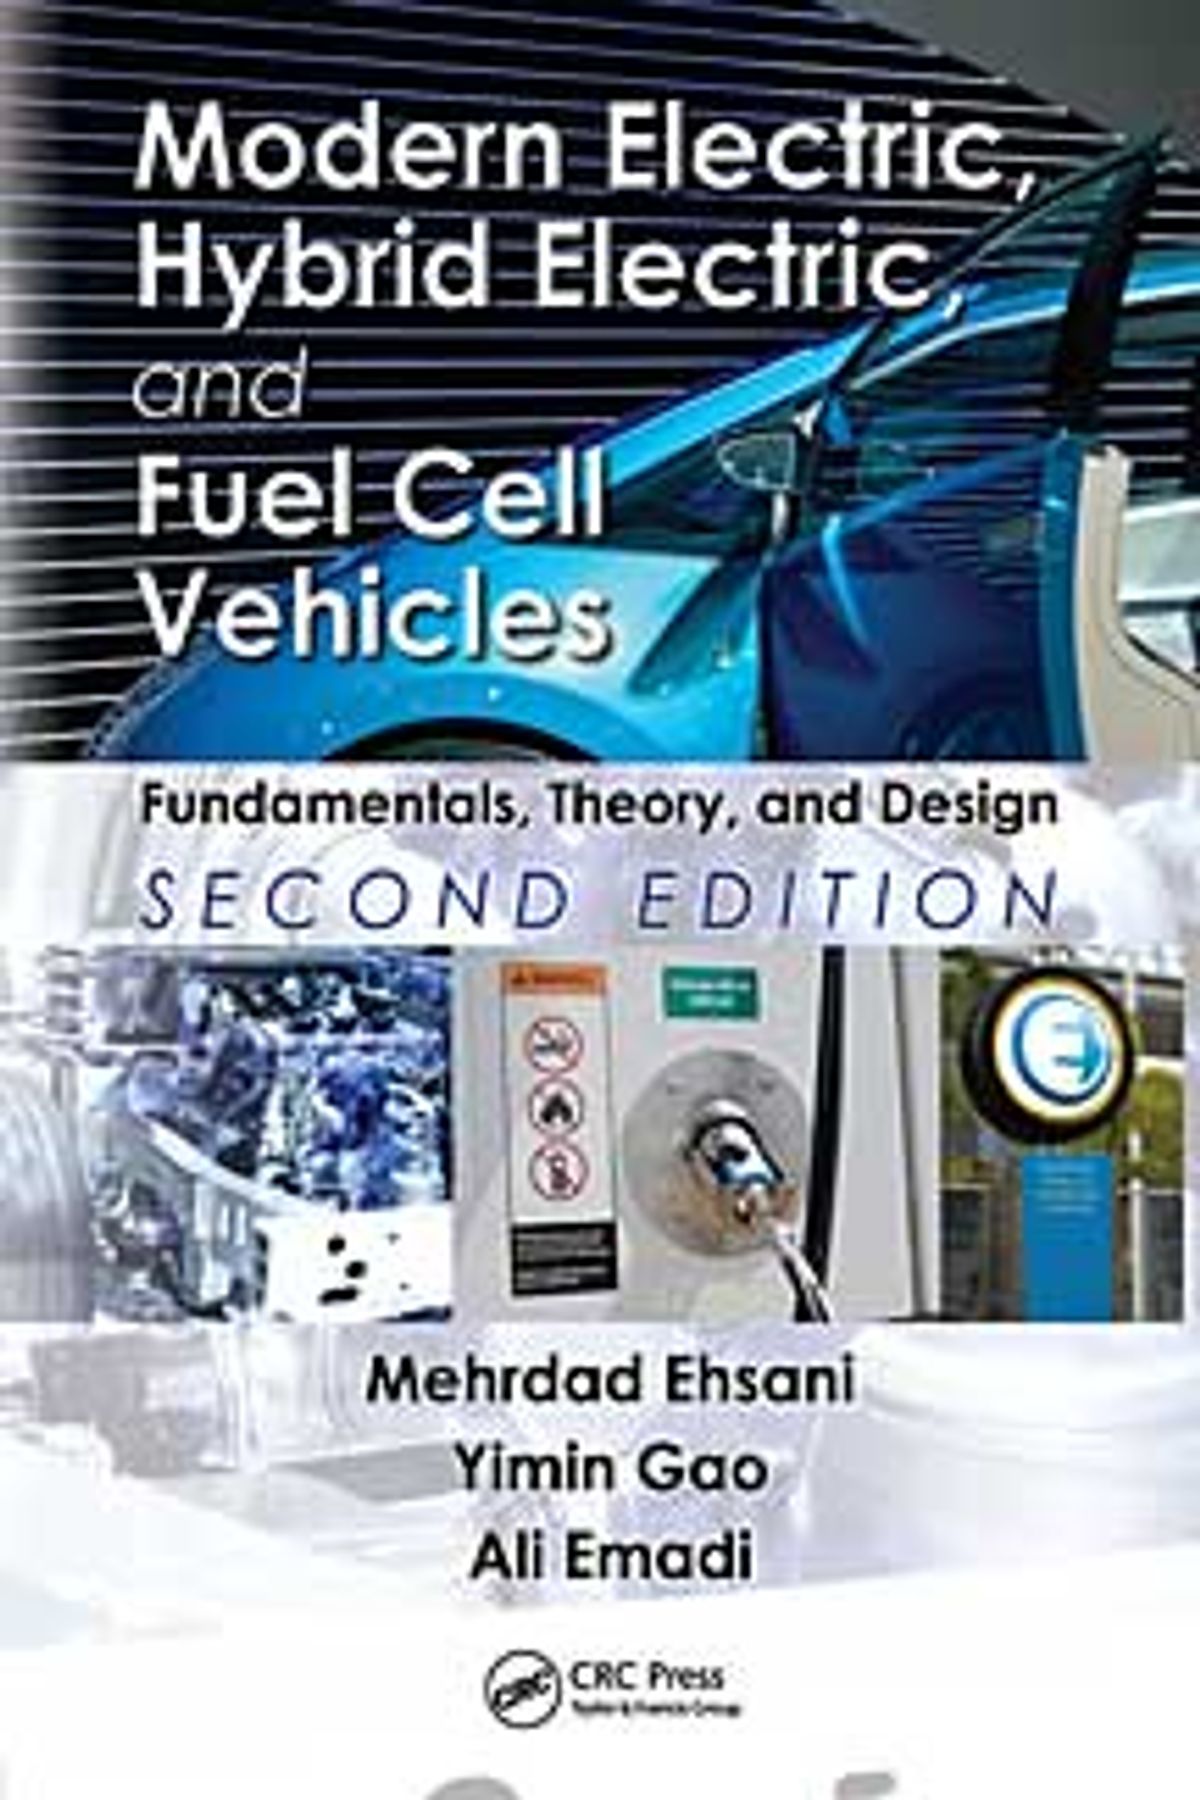 Review: Modern Electric, Hybrid Electric, and Fuel Cell Vehicles: Fundamentals, Theory, and Design, Second Edition